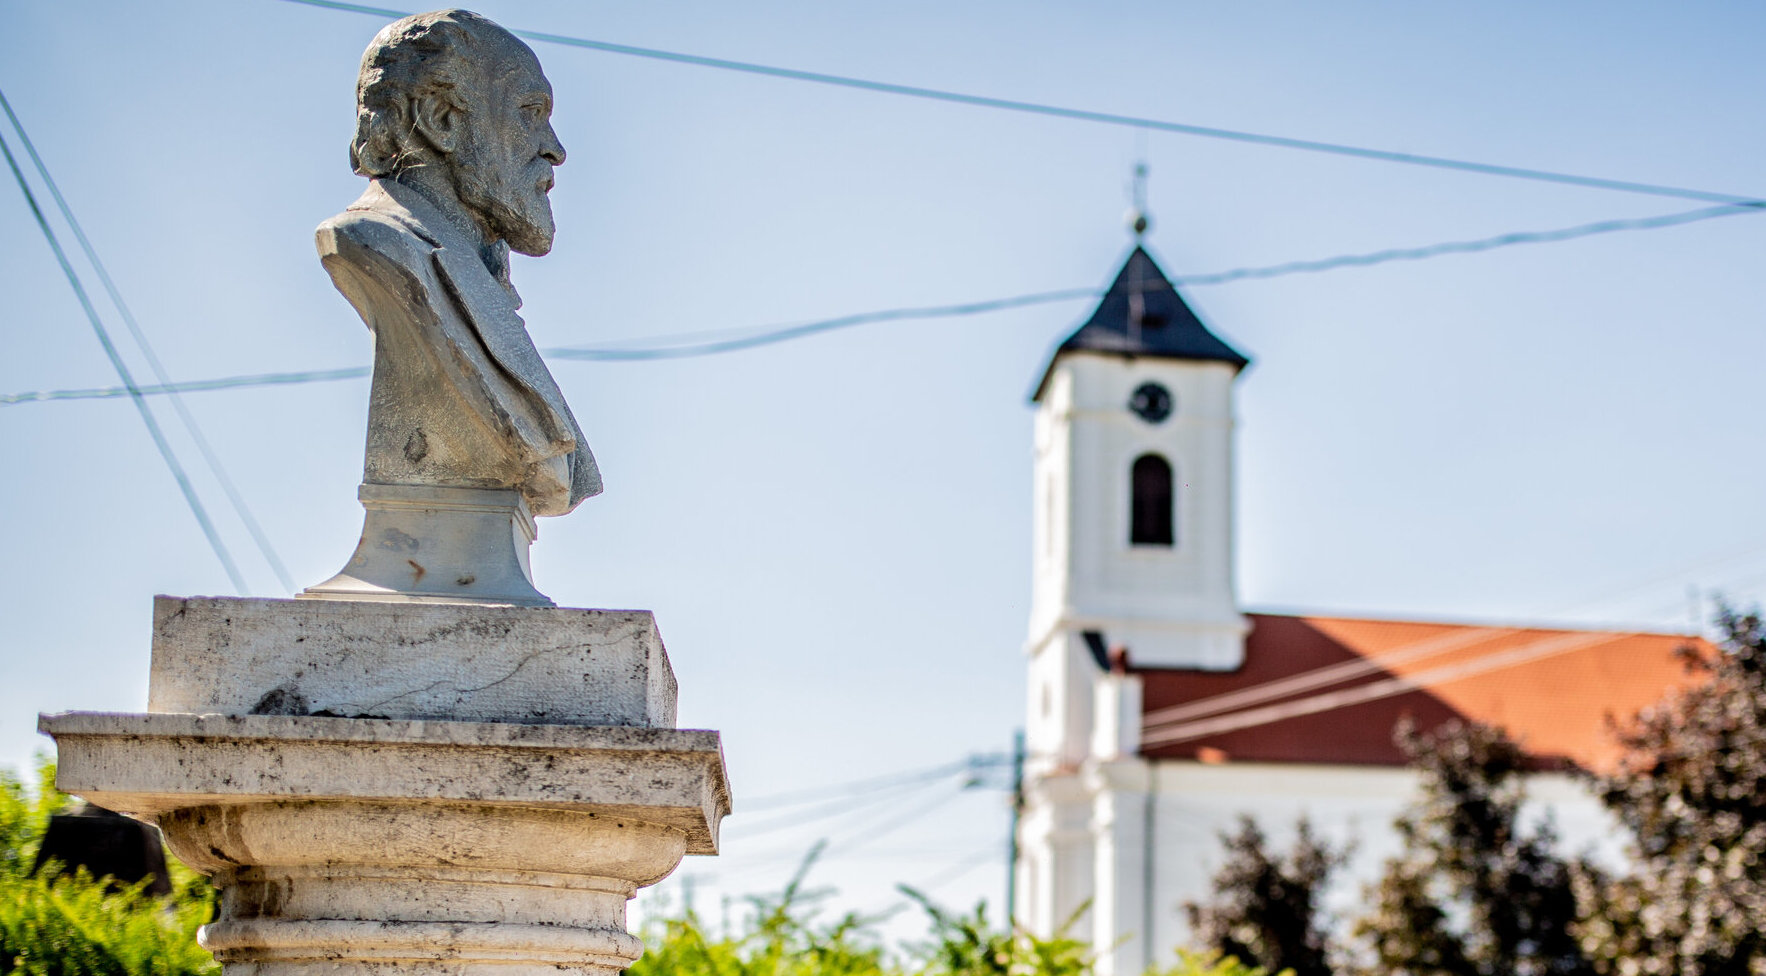 8 Balaton statues that reveal fascinating local history